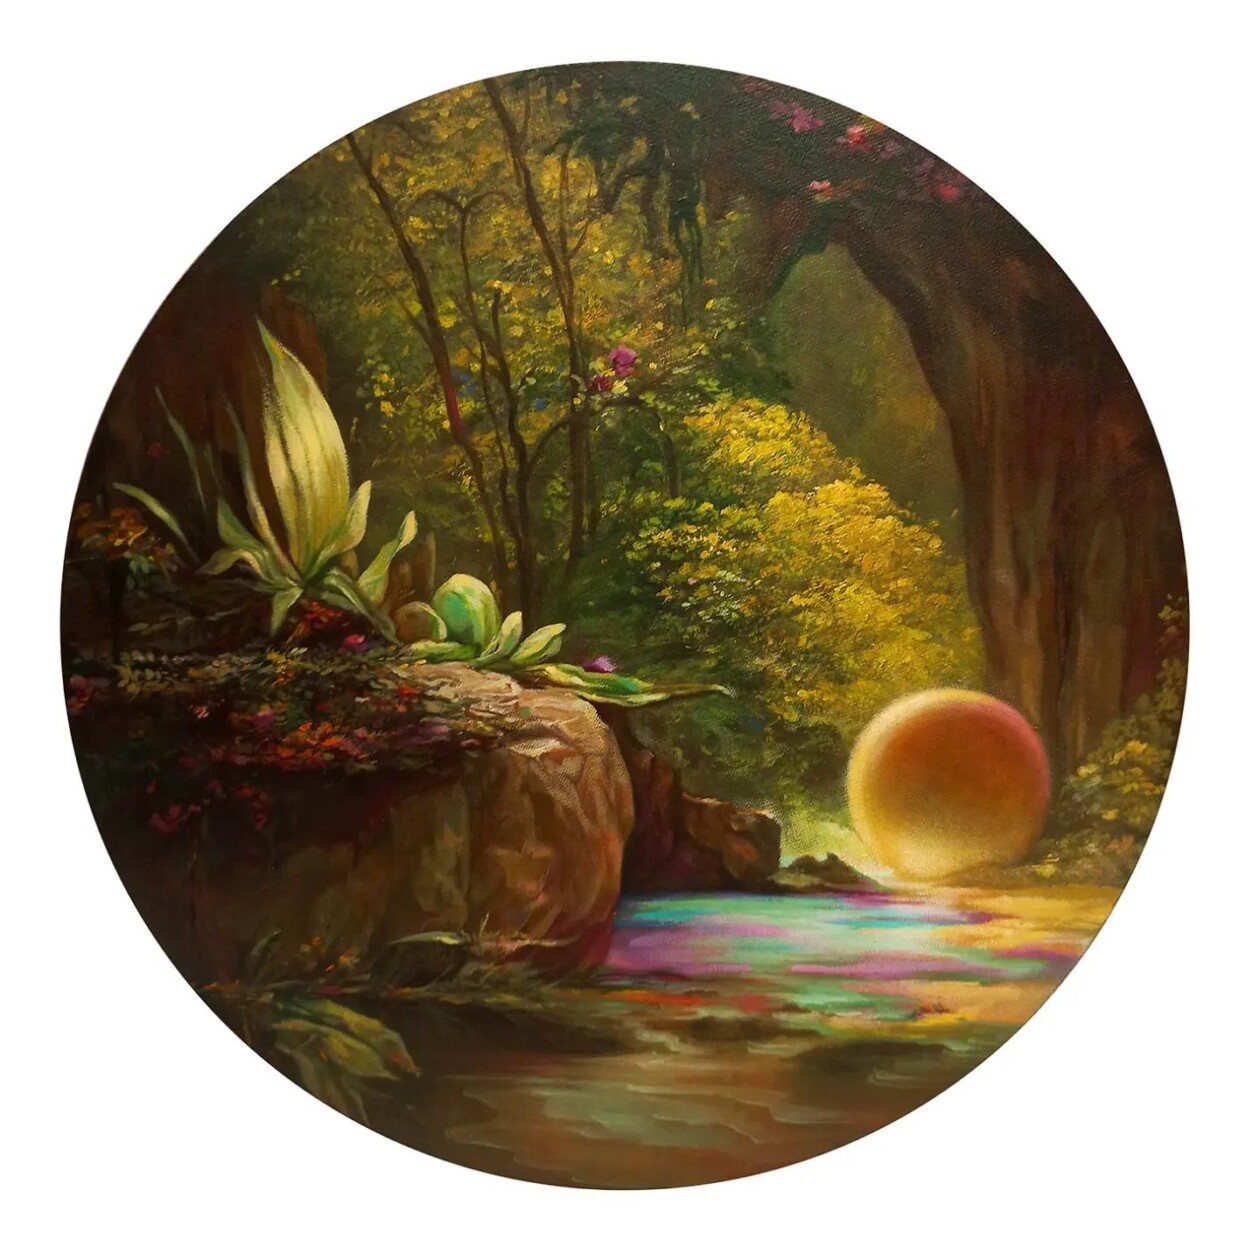 The Ethereal Landscape Paintings Of Andrea Du Plessis (9)